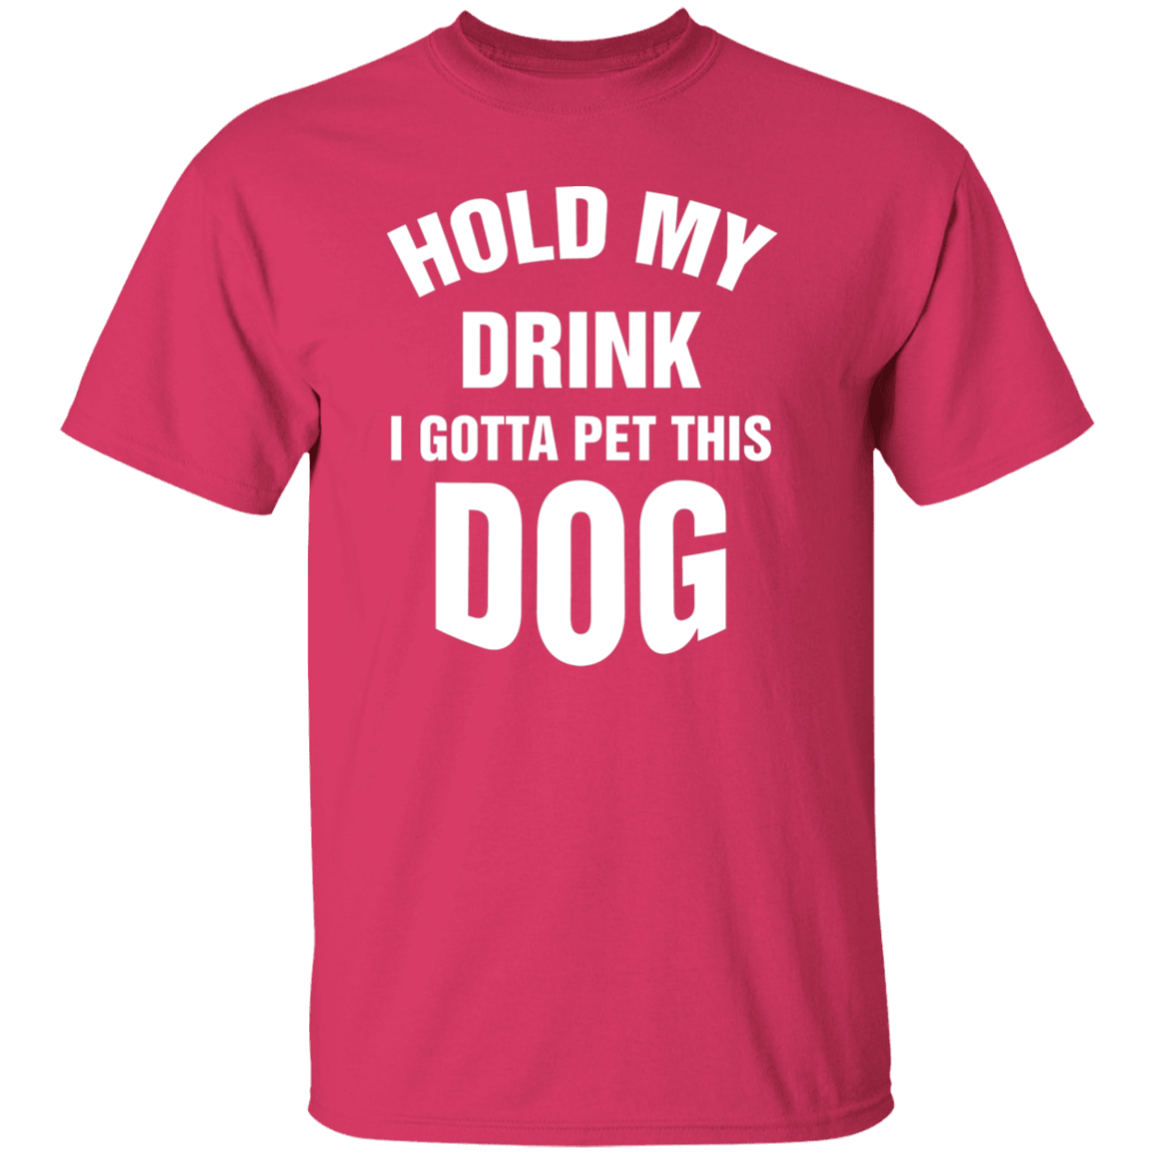 Hold My Drink - T Shirt.